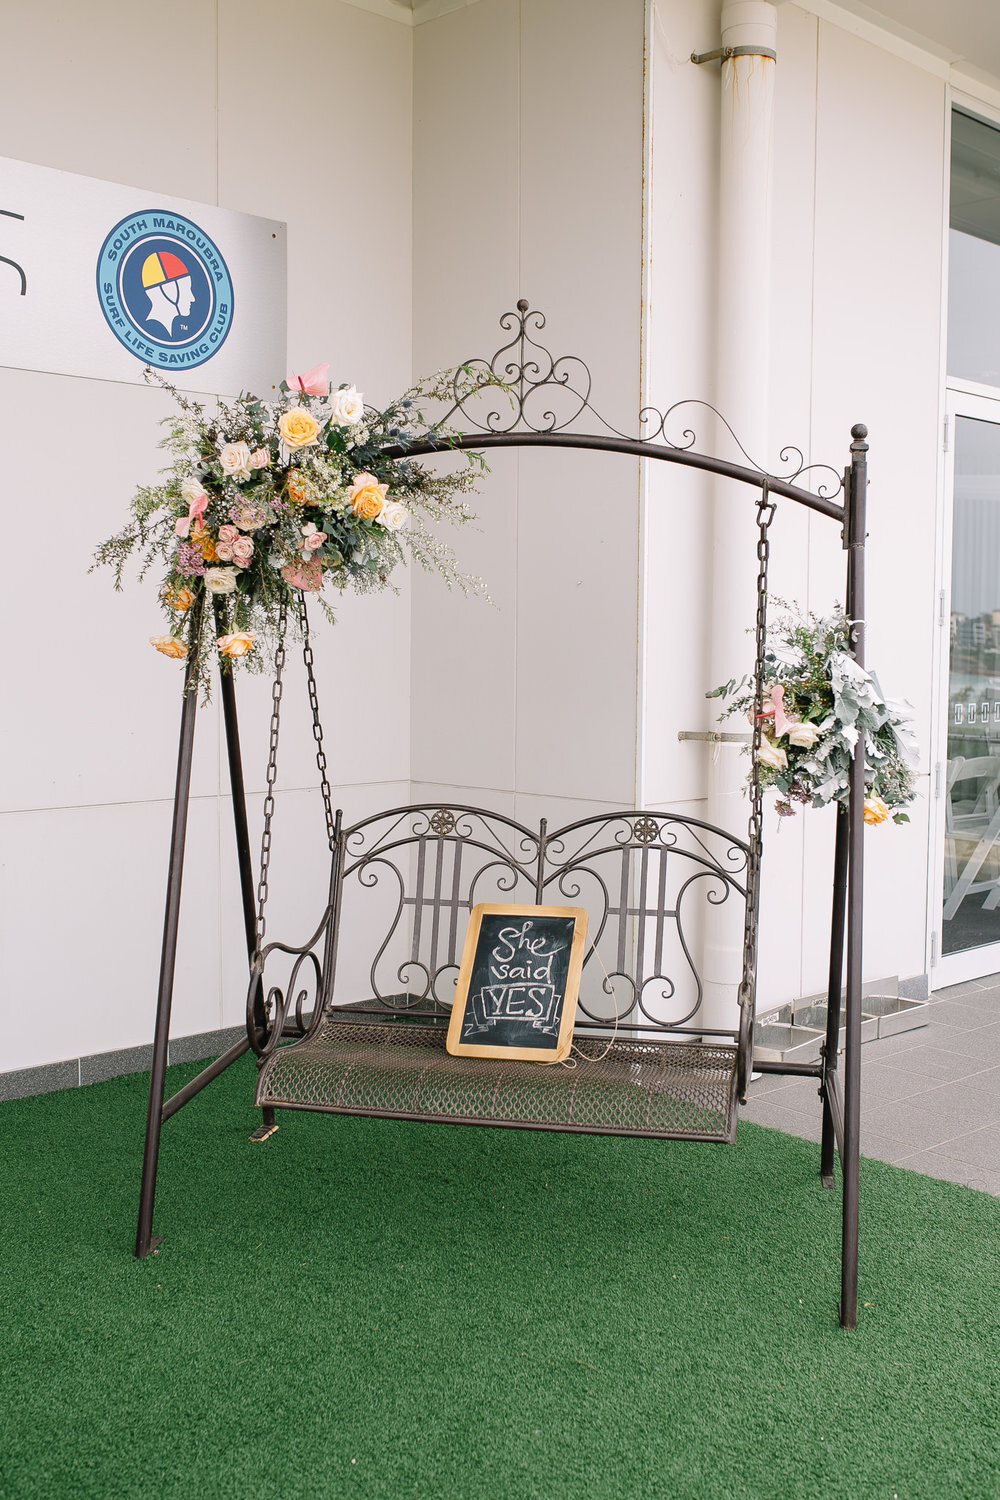 ornamental swing decorated with flowers at south maroubra slsc